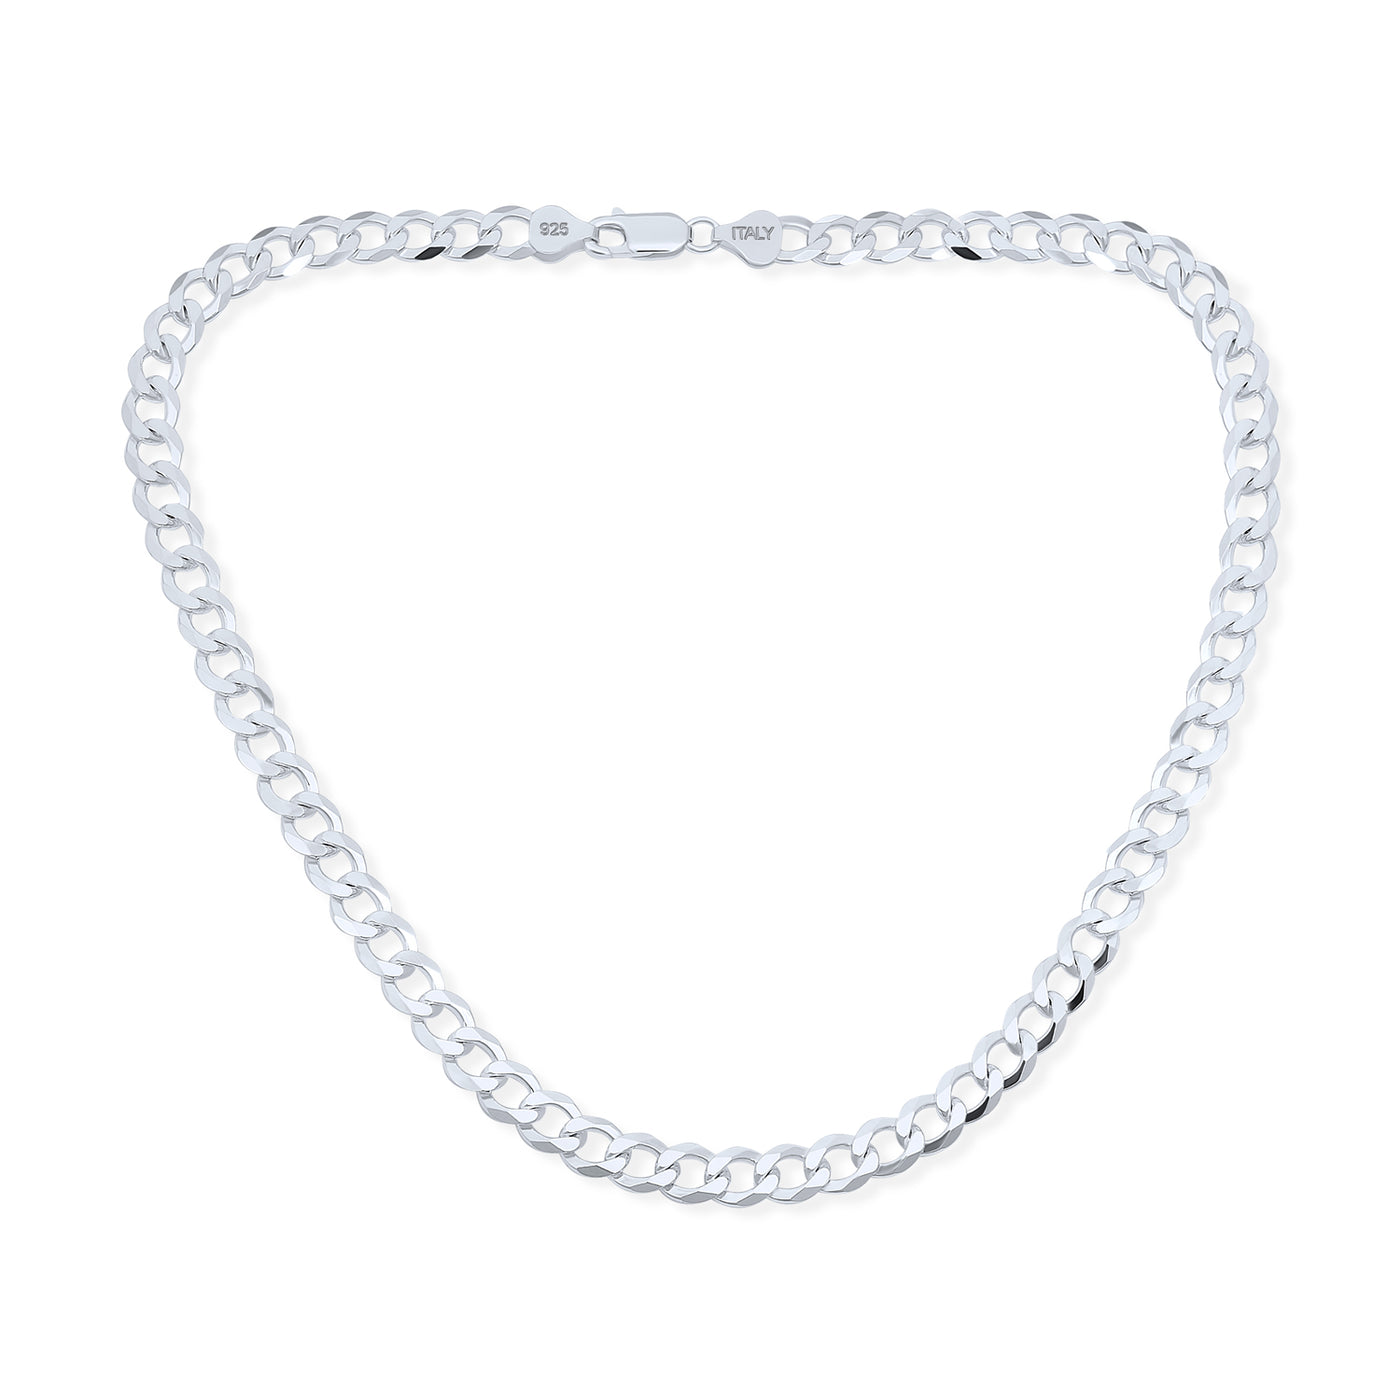 Solid Curb Cuban Chain 180 Gauge 7MM Necklace Sterling Silver 16-30"